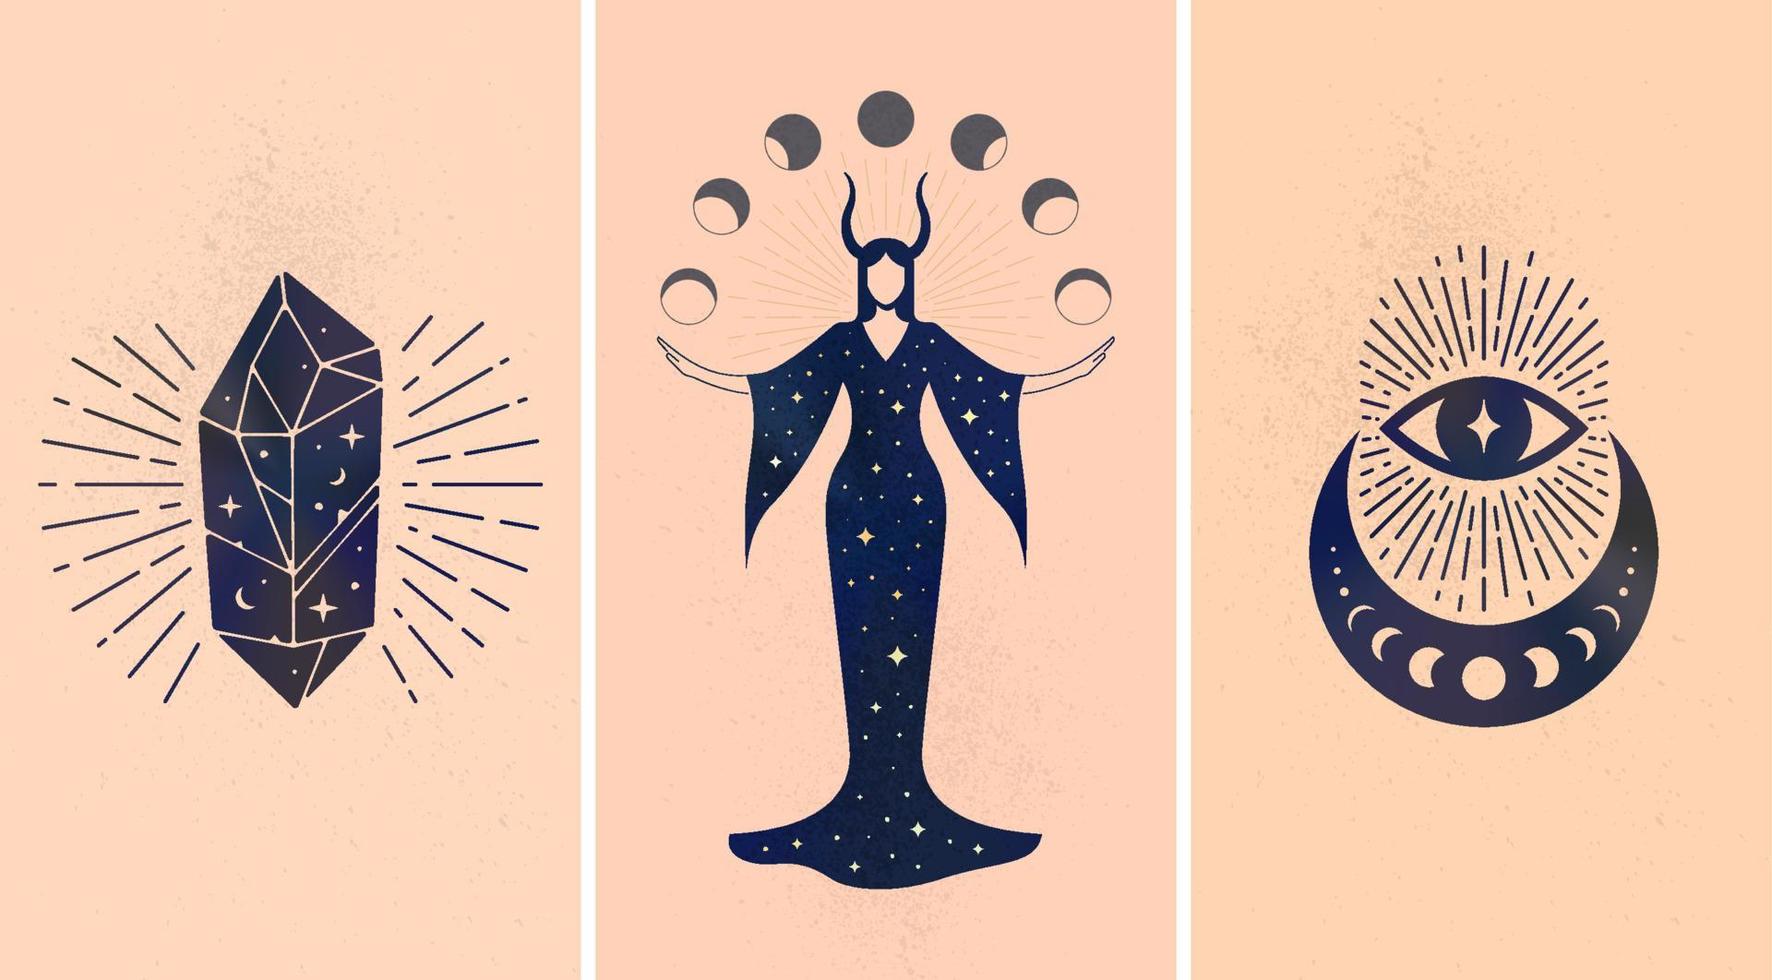 Set of black mystic ornaments depicted on beige background as symbols of magic and astrology. vector